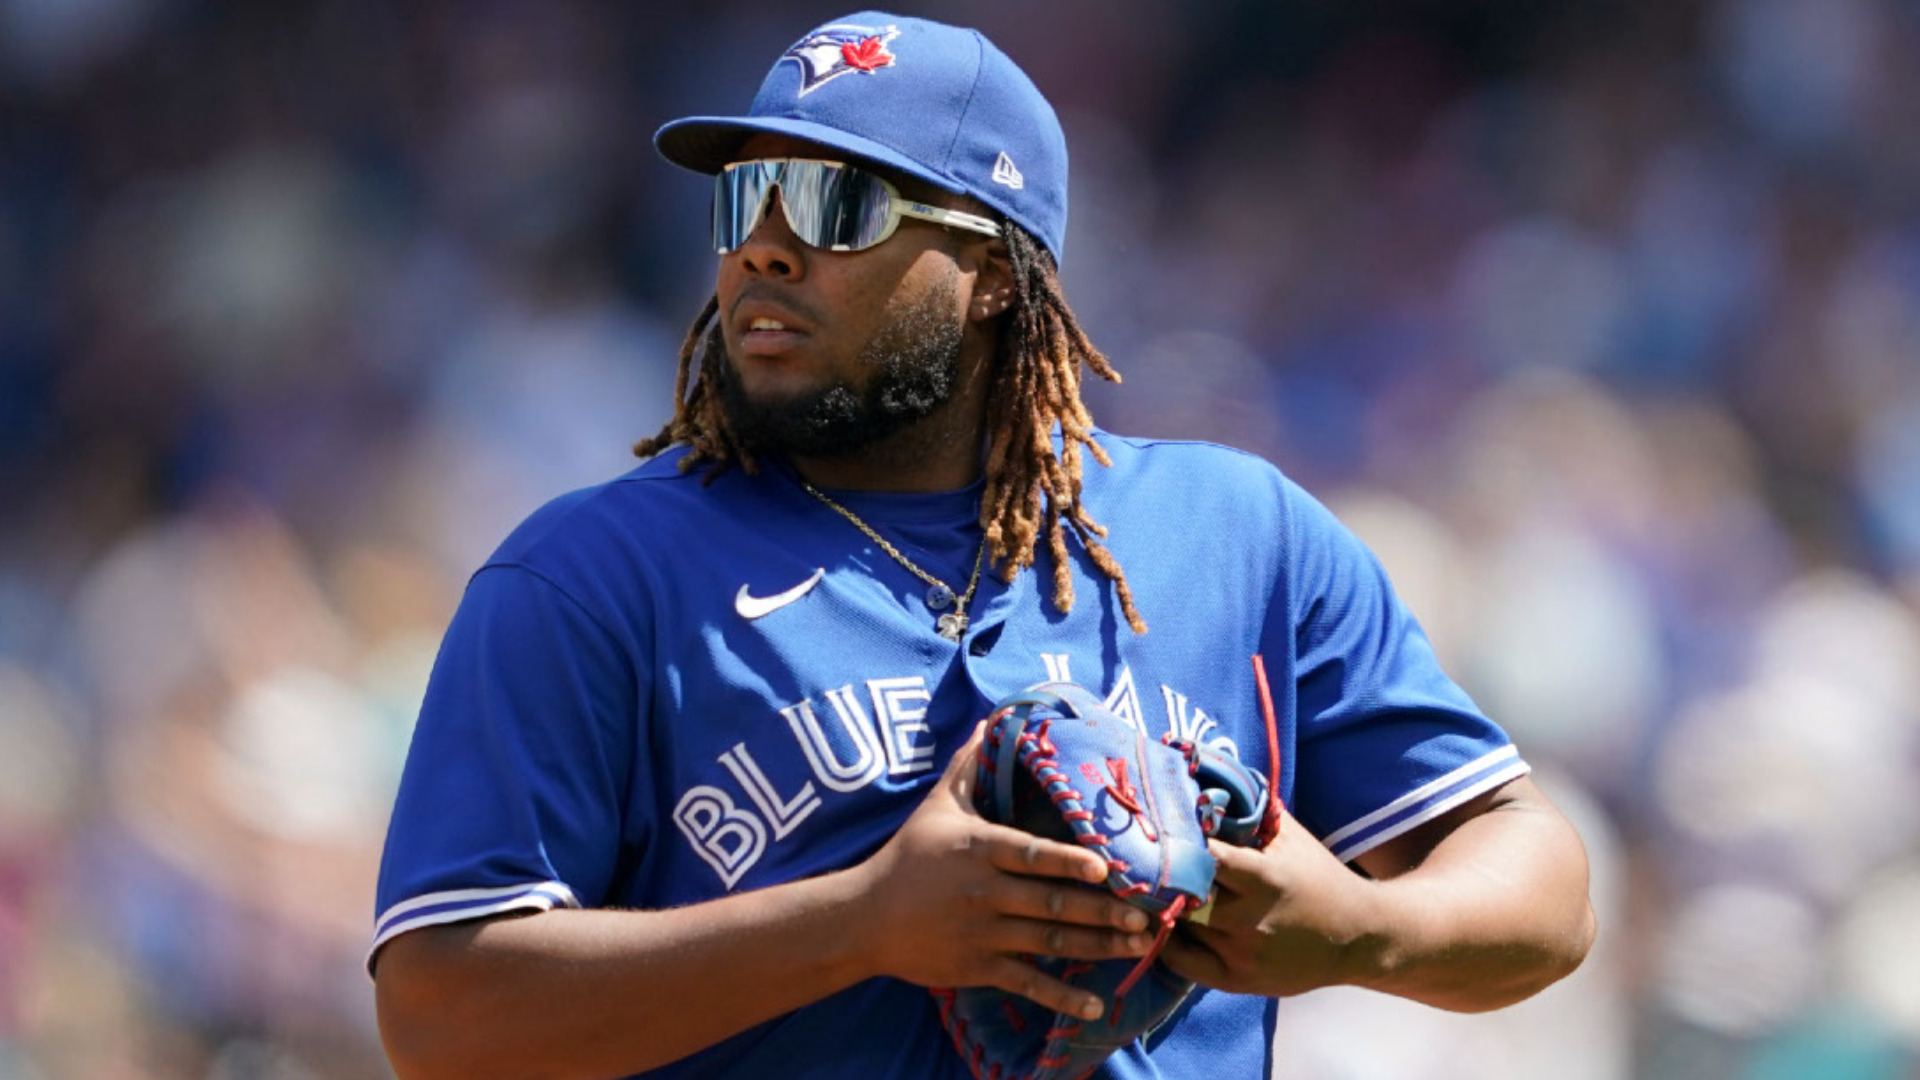 What does the future hold for Blue Jays Vladimir Guerrero Jr